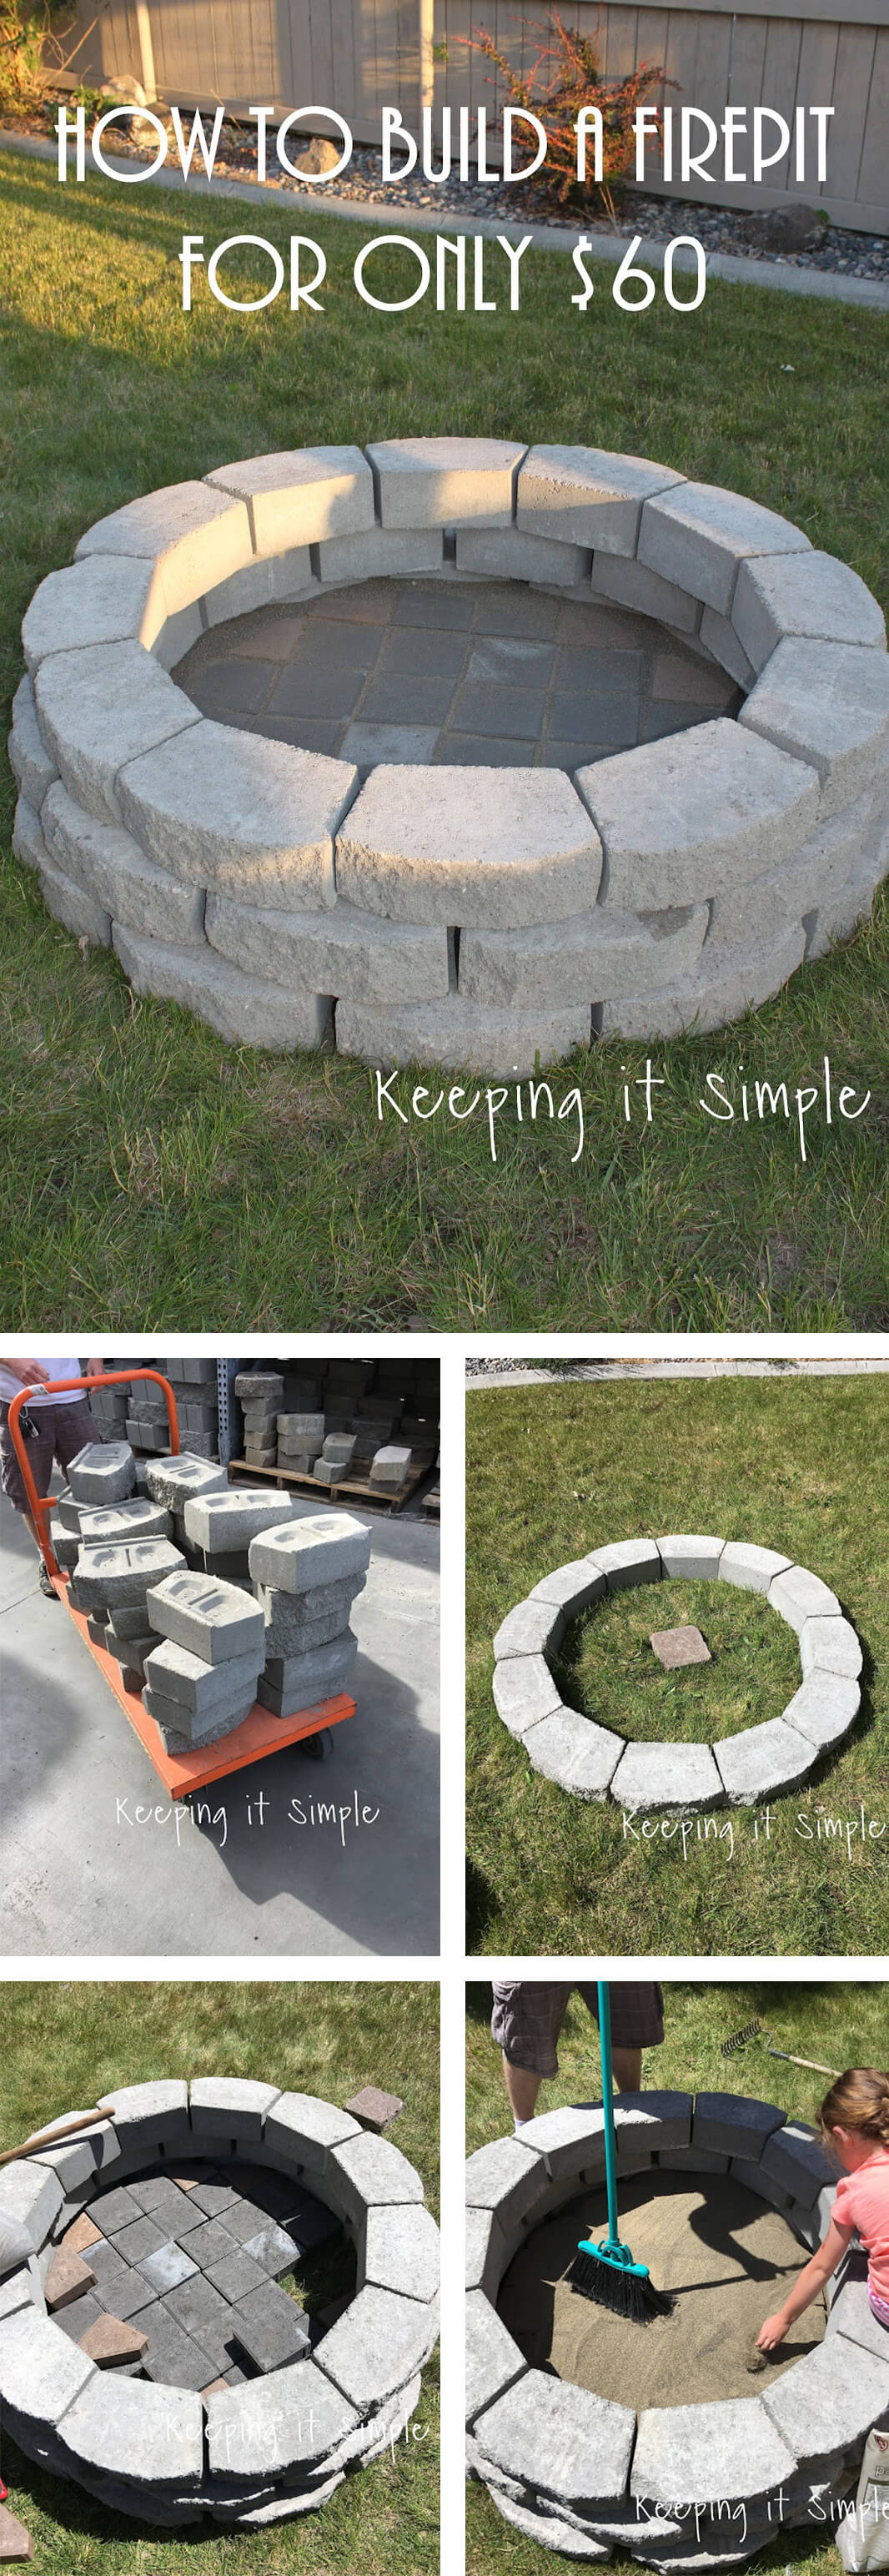 27 Best Diy Firepit Ideas And Designs, How Do You Build A Fire Pit Under 100